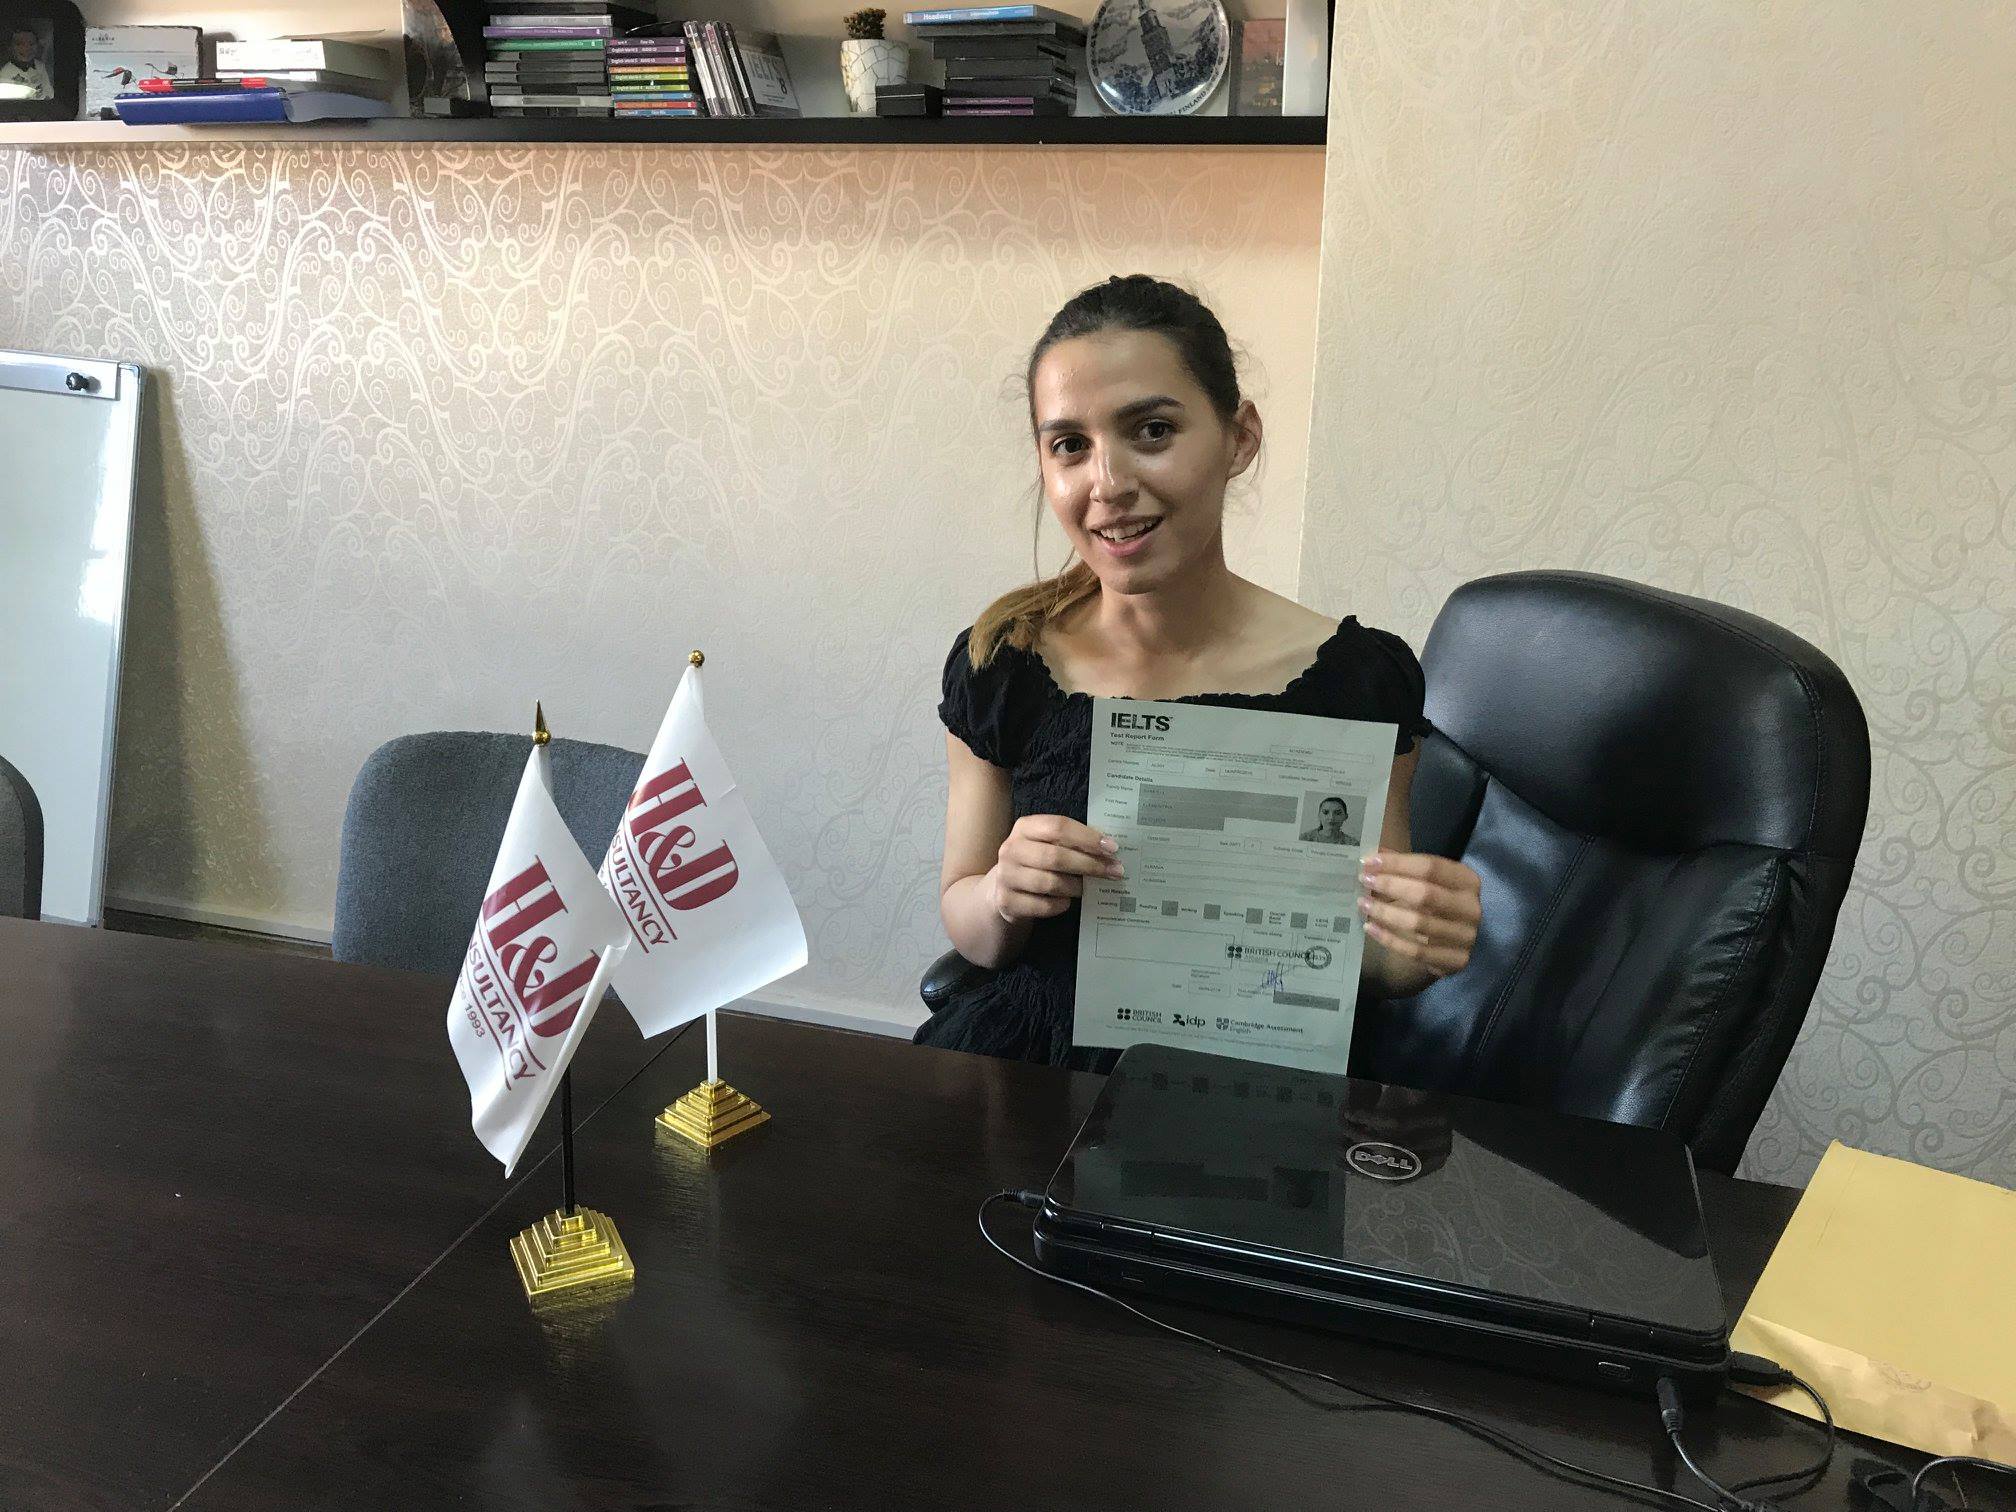 Meet the teenager Klementina Kamolli who sat the prestigious IELTS Test and the Test Report Form certified her competence in English as a Foreign Language at CEFR Level C1